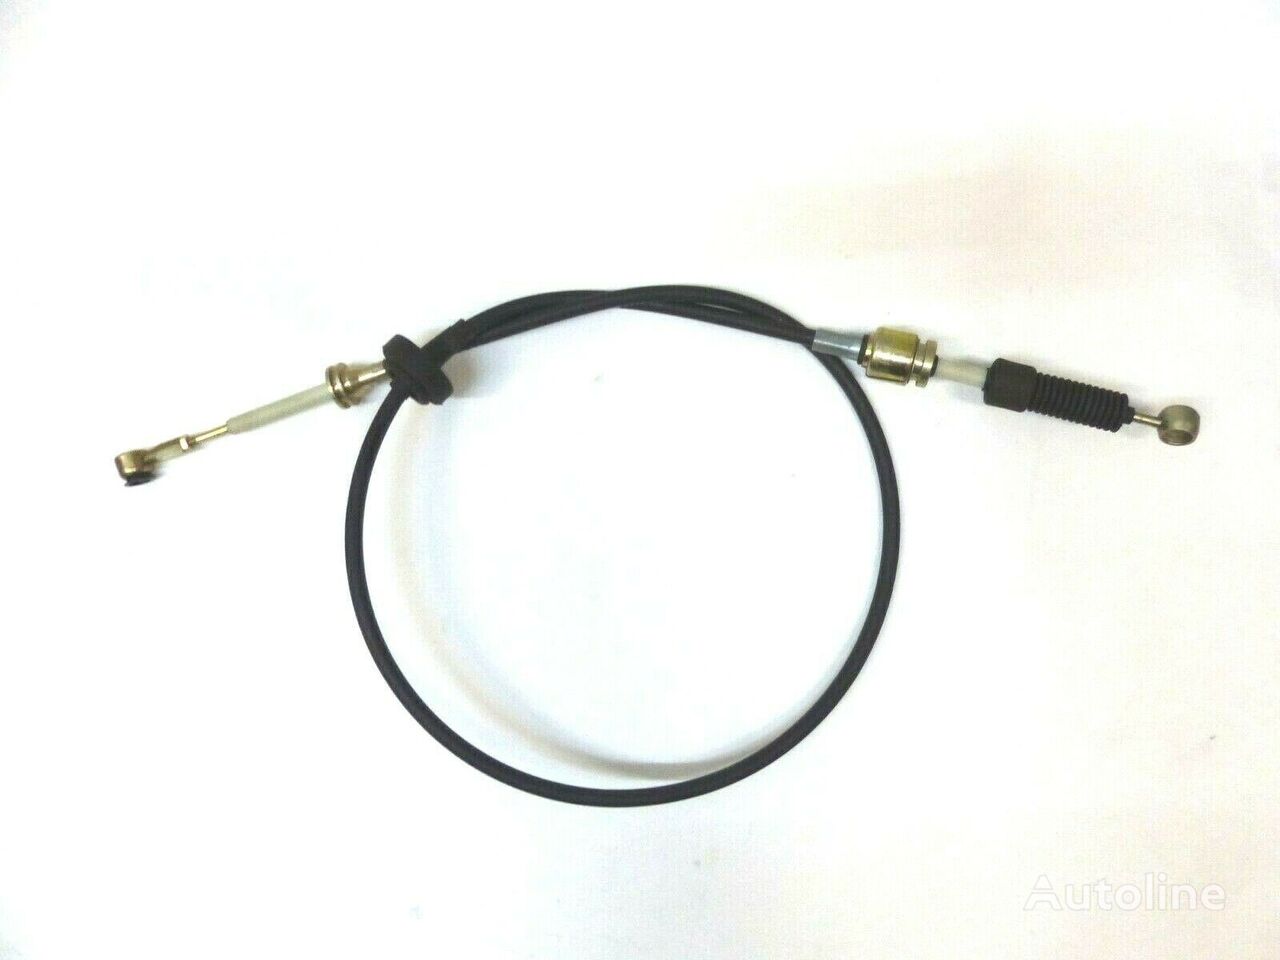 IVECO Seilzug Feststellbremse Handbremsseil passend für 500353648 gear shift cable for IVECO truck tractor